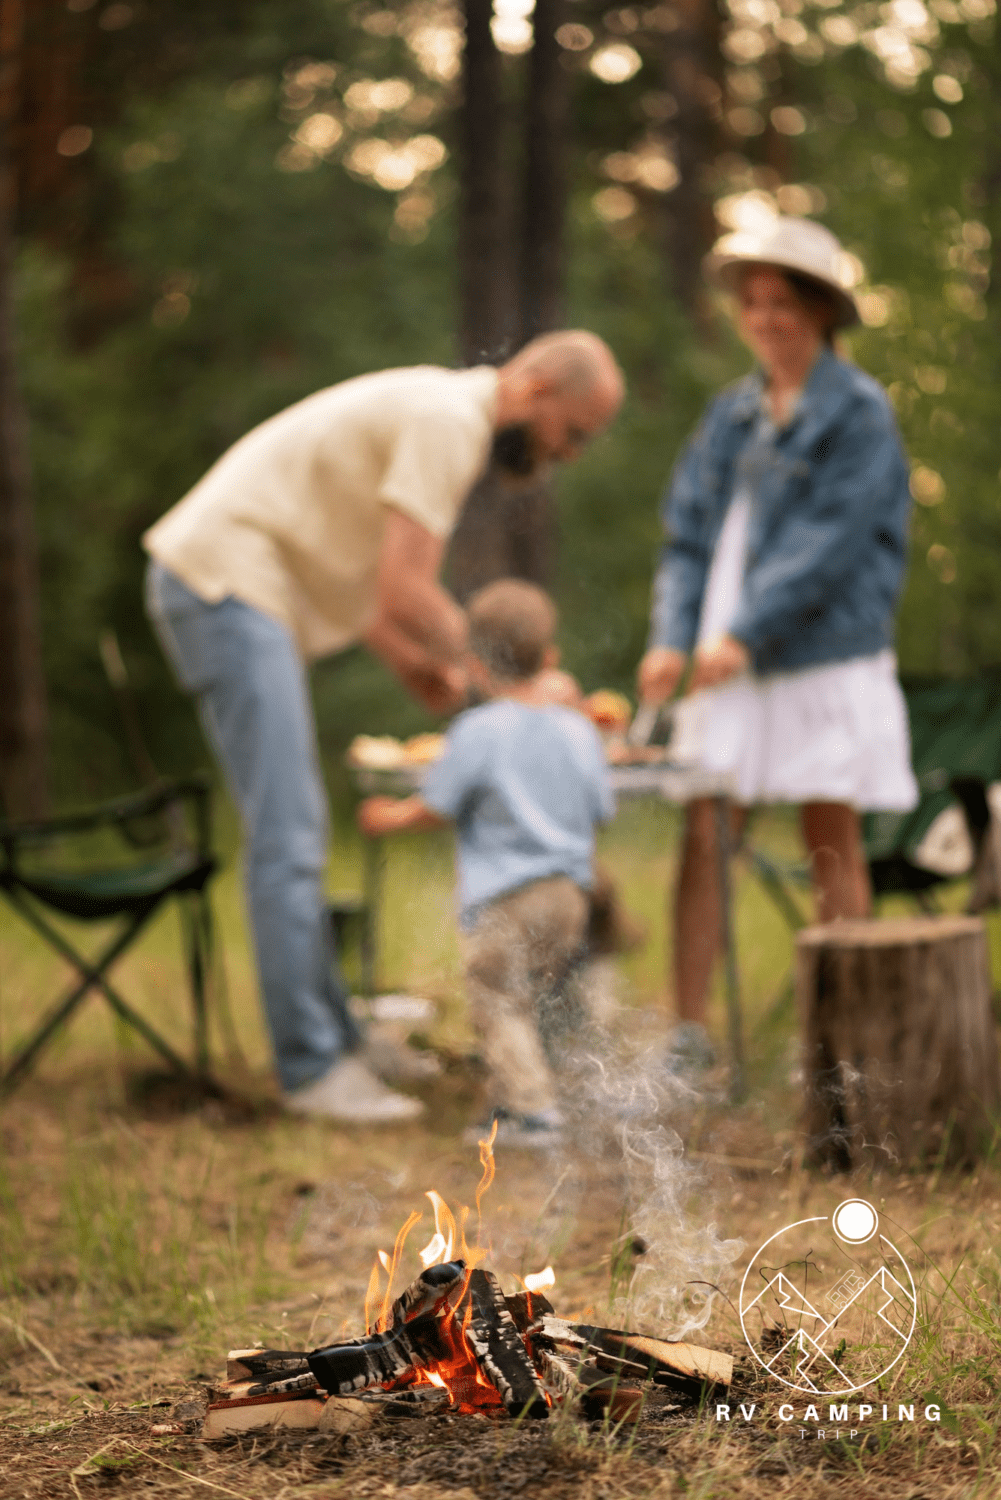 Family camping with an outdoor campfire